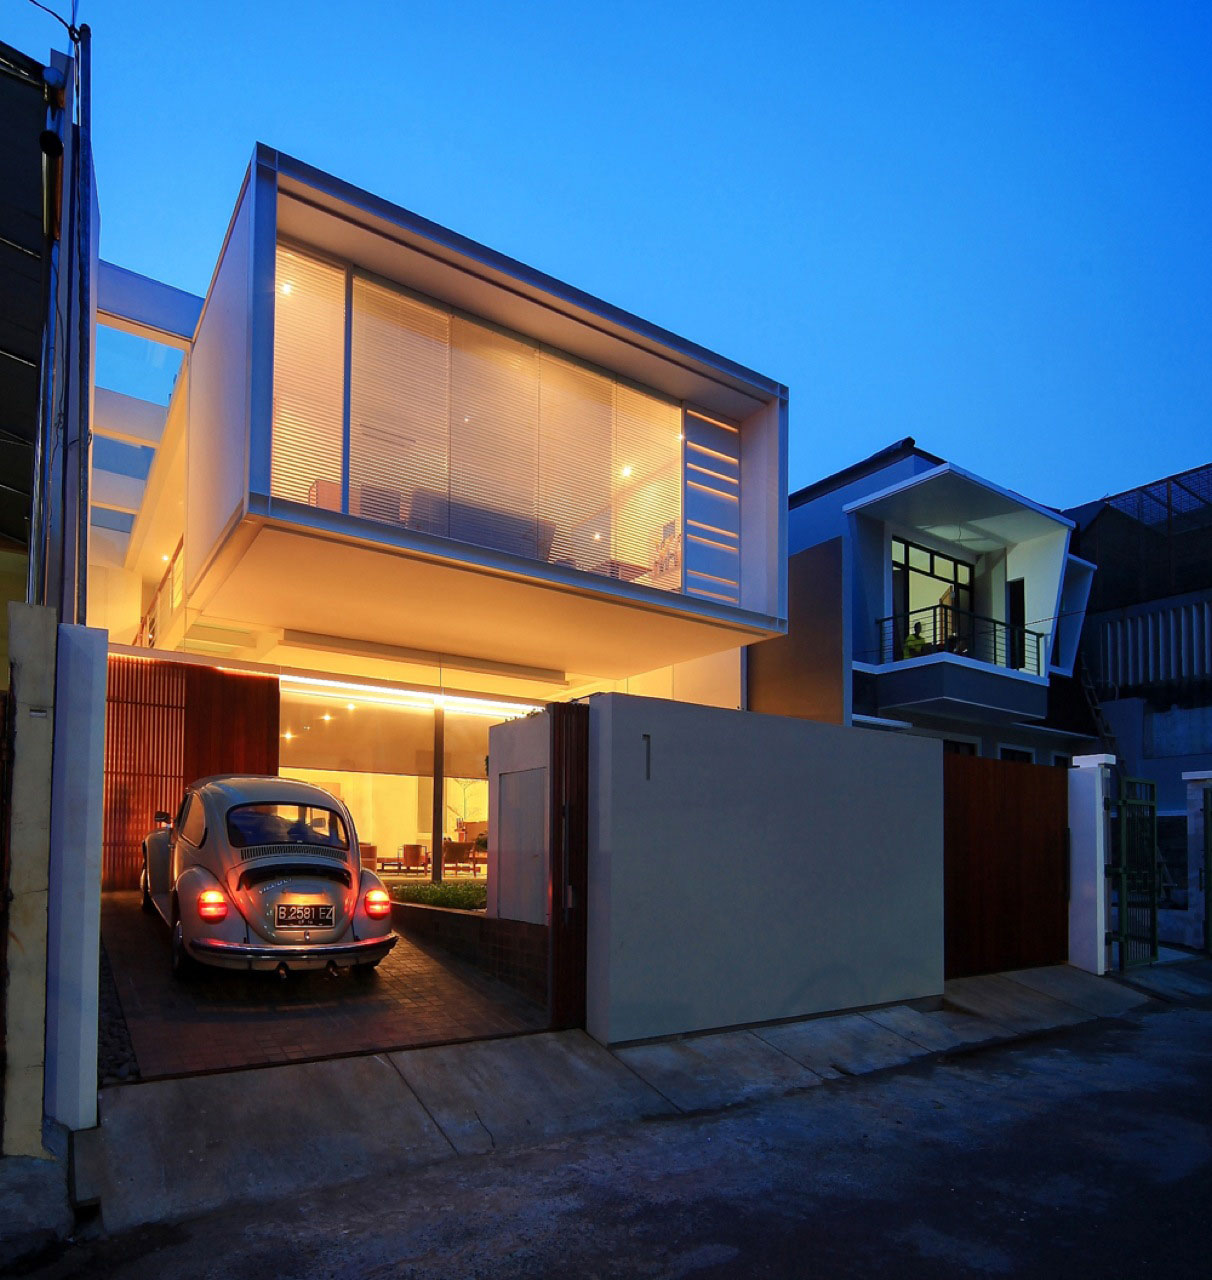 garage narrow houses urban indonesia cool modern jakarta architecture open floors parking contemporary garages night lighting archdaily stunning chrystalline space